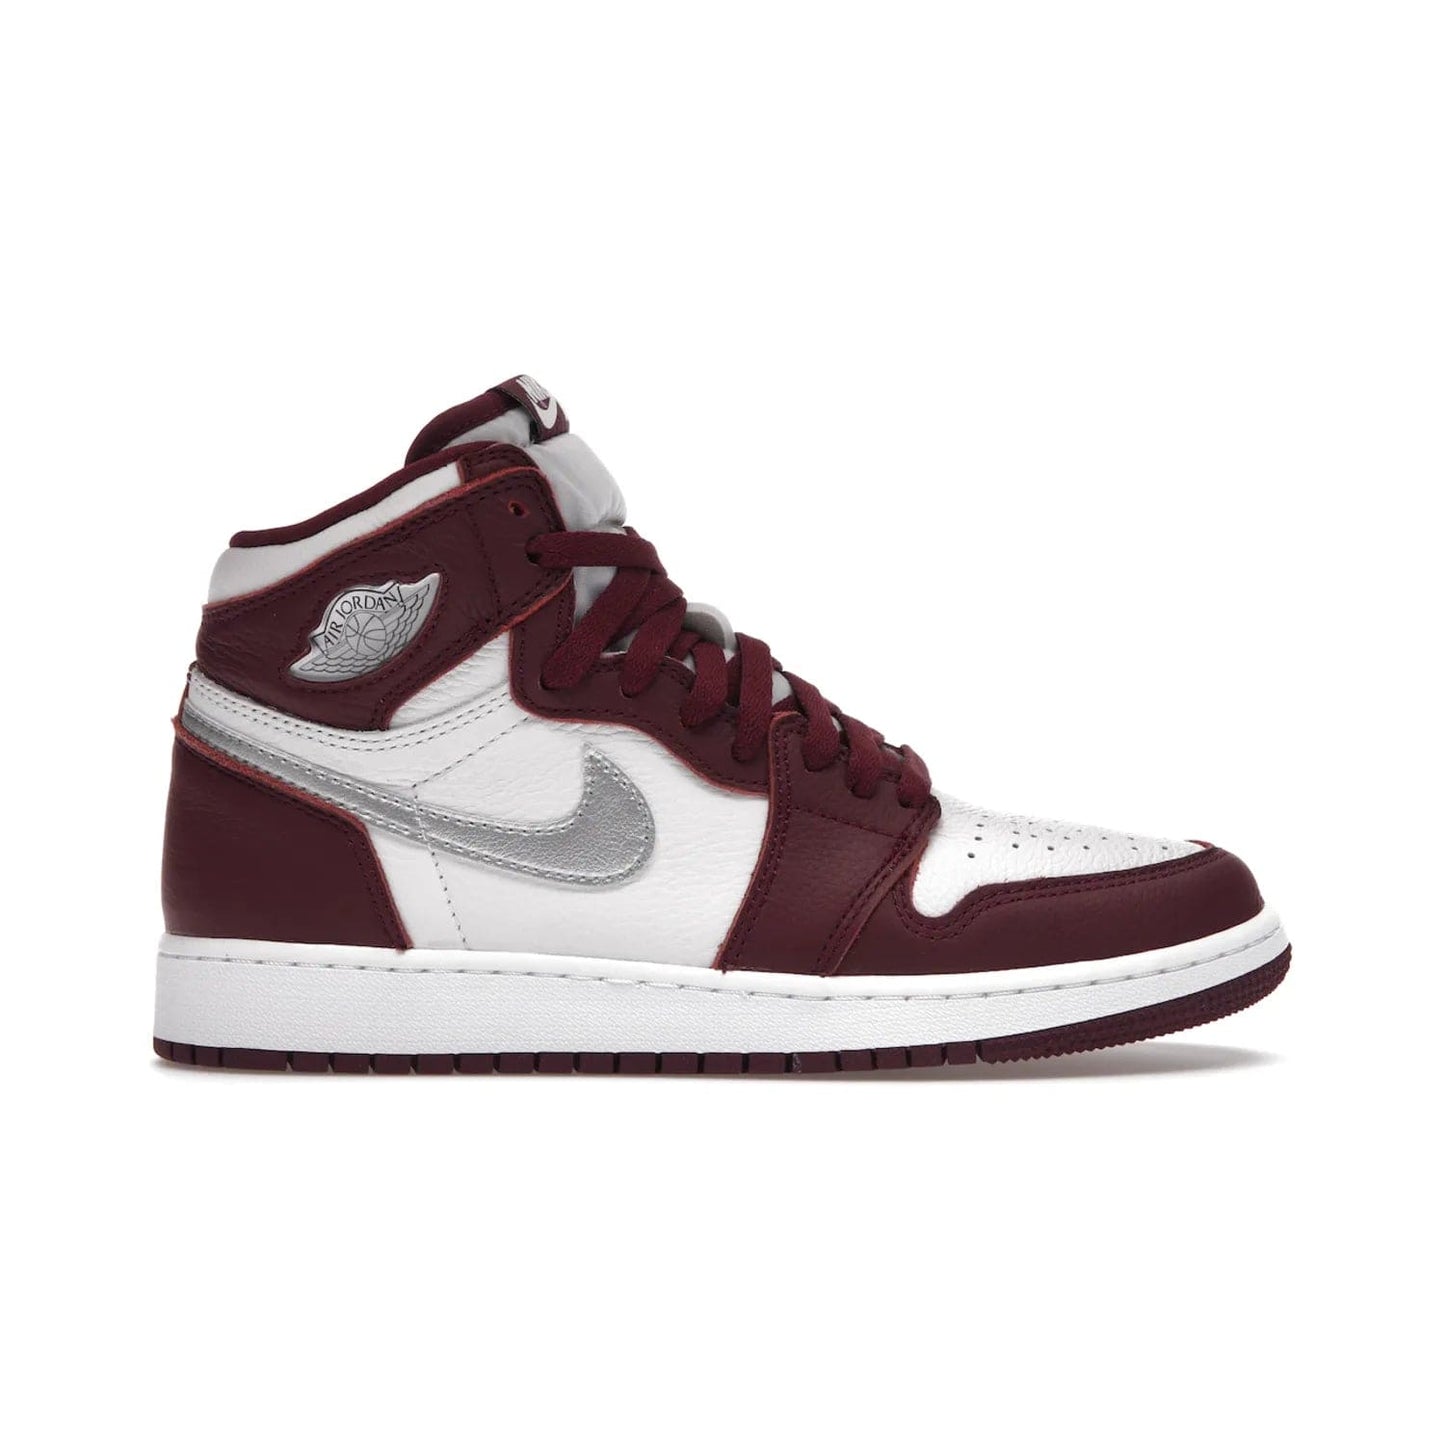 Jordan 1 Retro High OG Bordeaux (GS) - Image 1 - Only at www.BallersClubKickz.com - #
Introducing the Air Jordan 1 Retro High OG Bordeaux GS – a signature colorway part of the Jordan Brand Fall 2021 lineup. White leather upper & Bordeaux overlays, metallic silver swoosh, jeweled Air Jordan Wings logo & more. Step up your style game with this sleek fall season silhouette.